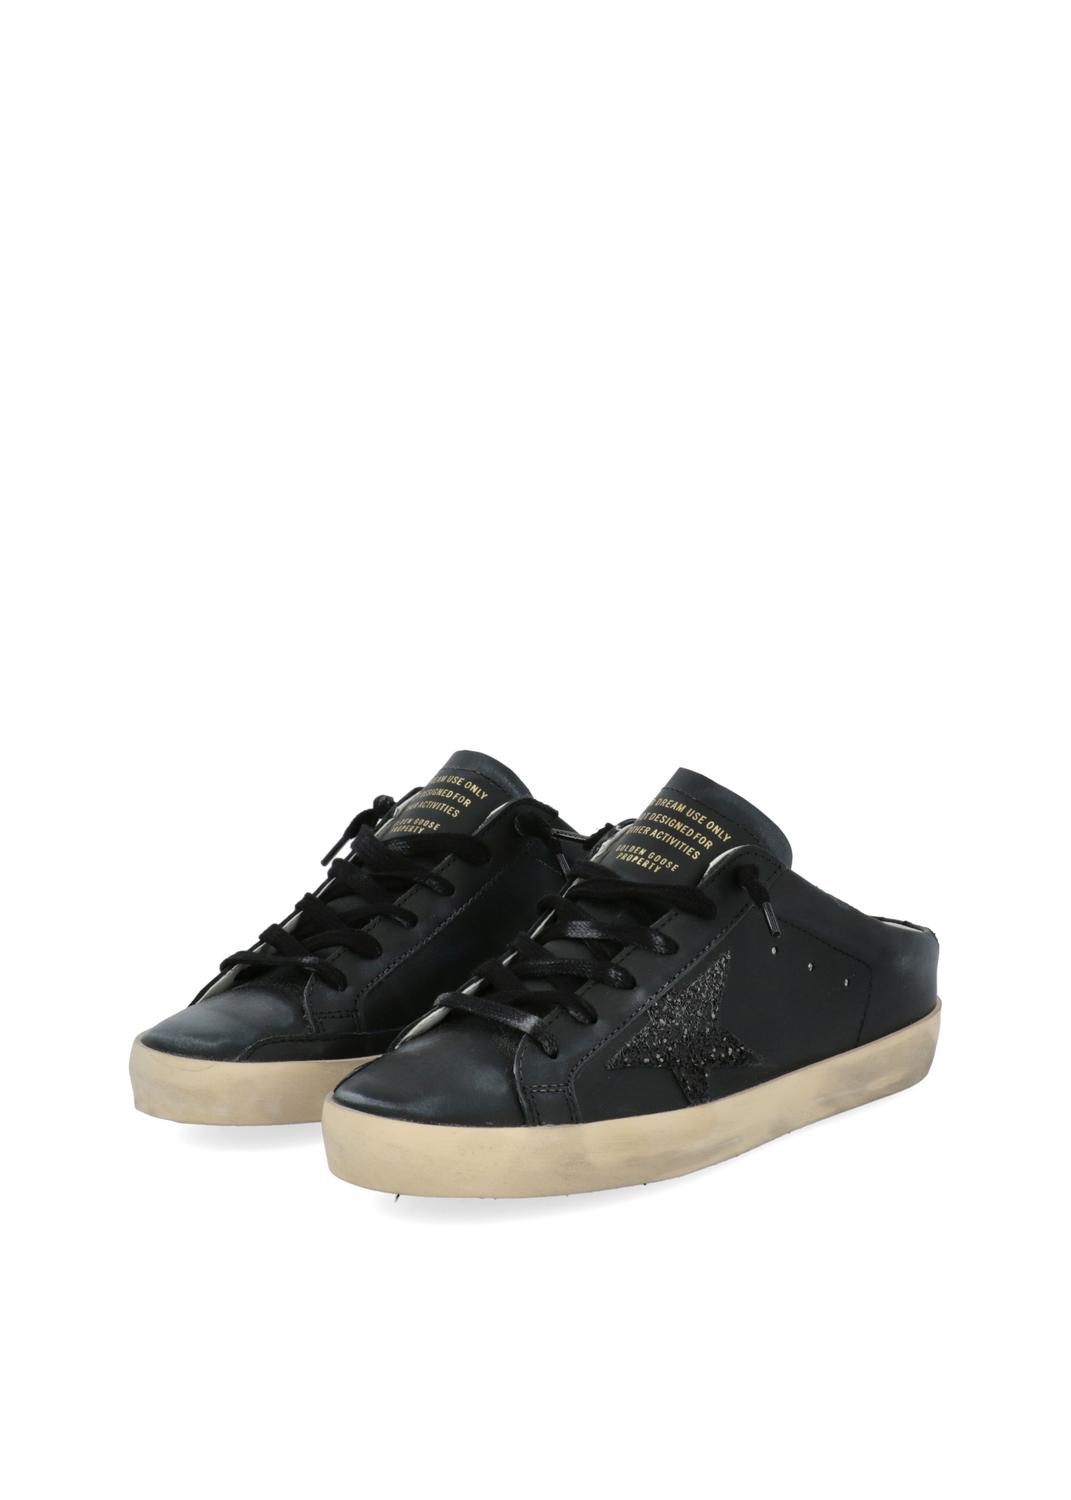 Golden Goose tenis Super-Star para mujer GLG-ZDSUPERS - LOUDER Lifestyle